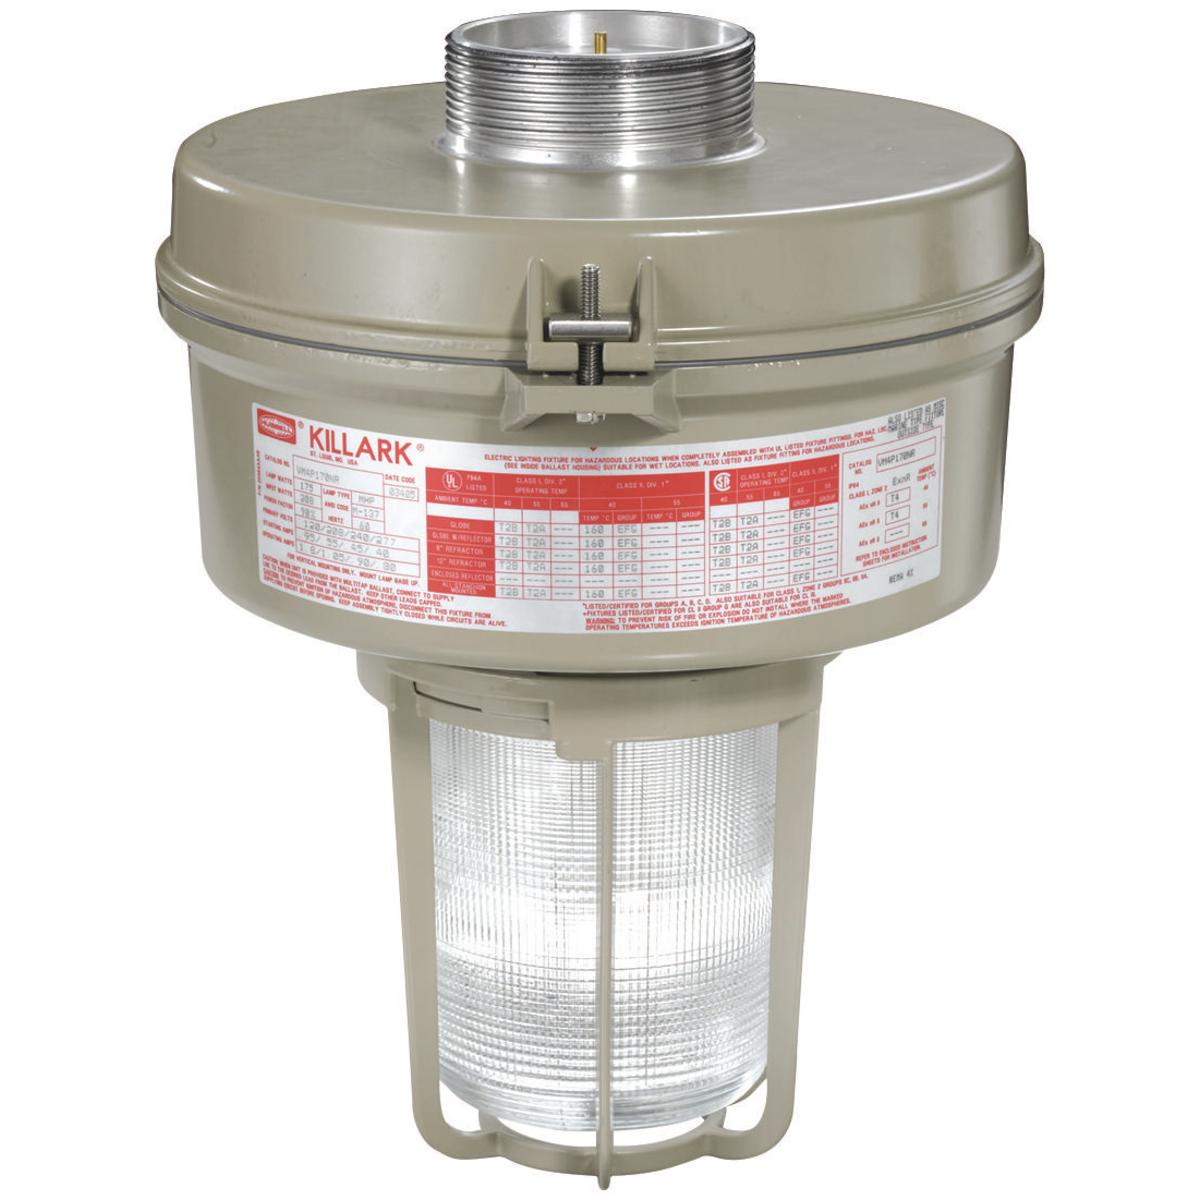 Hubbell VM3P200EZGLG VM3 Series - 200W Metal Halide Quadri-Volt - EZ Mount Adapter -  Globe and Guard  ; Ballast tank and splice box – corrosion resistant copper-free aluminum alloy with baked powder epoxy/polyester finish, electrostatically applied for complete, uniform corr